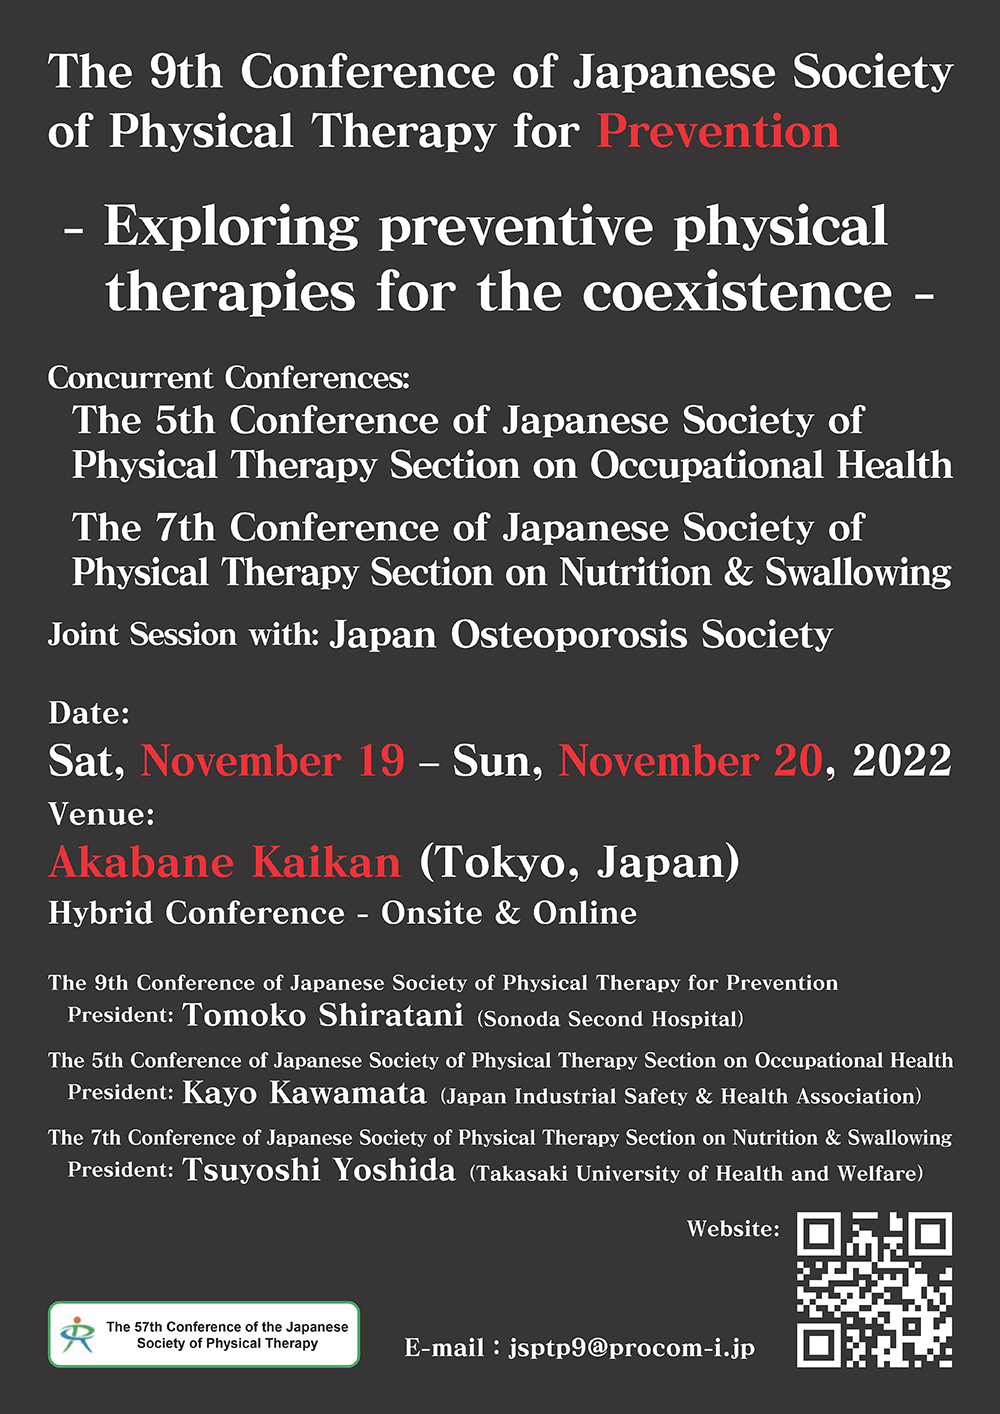 The 9th conference of the Japanese Society of Physical Therapy for Prevention. 19 - 20th November 